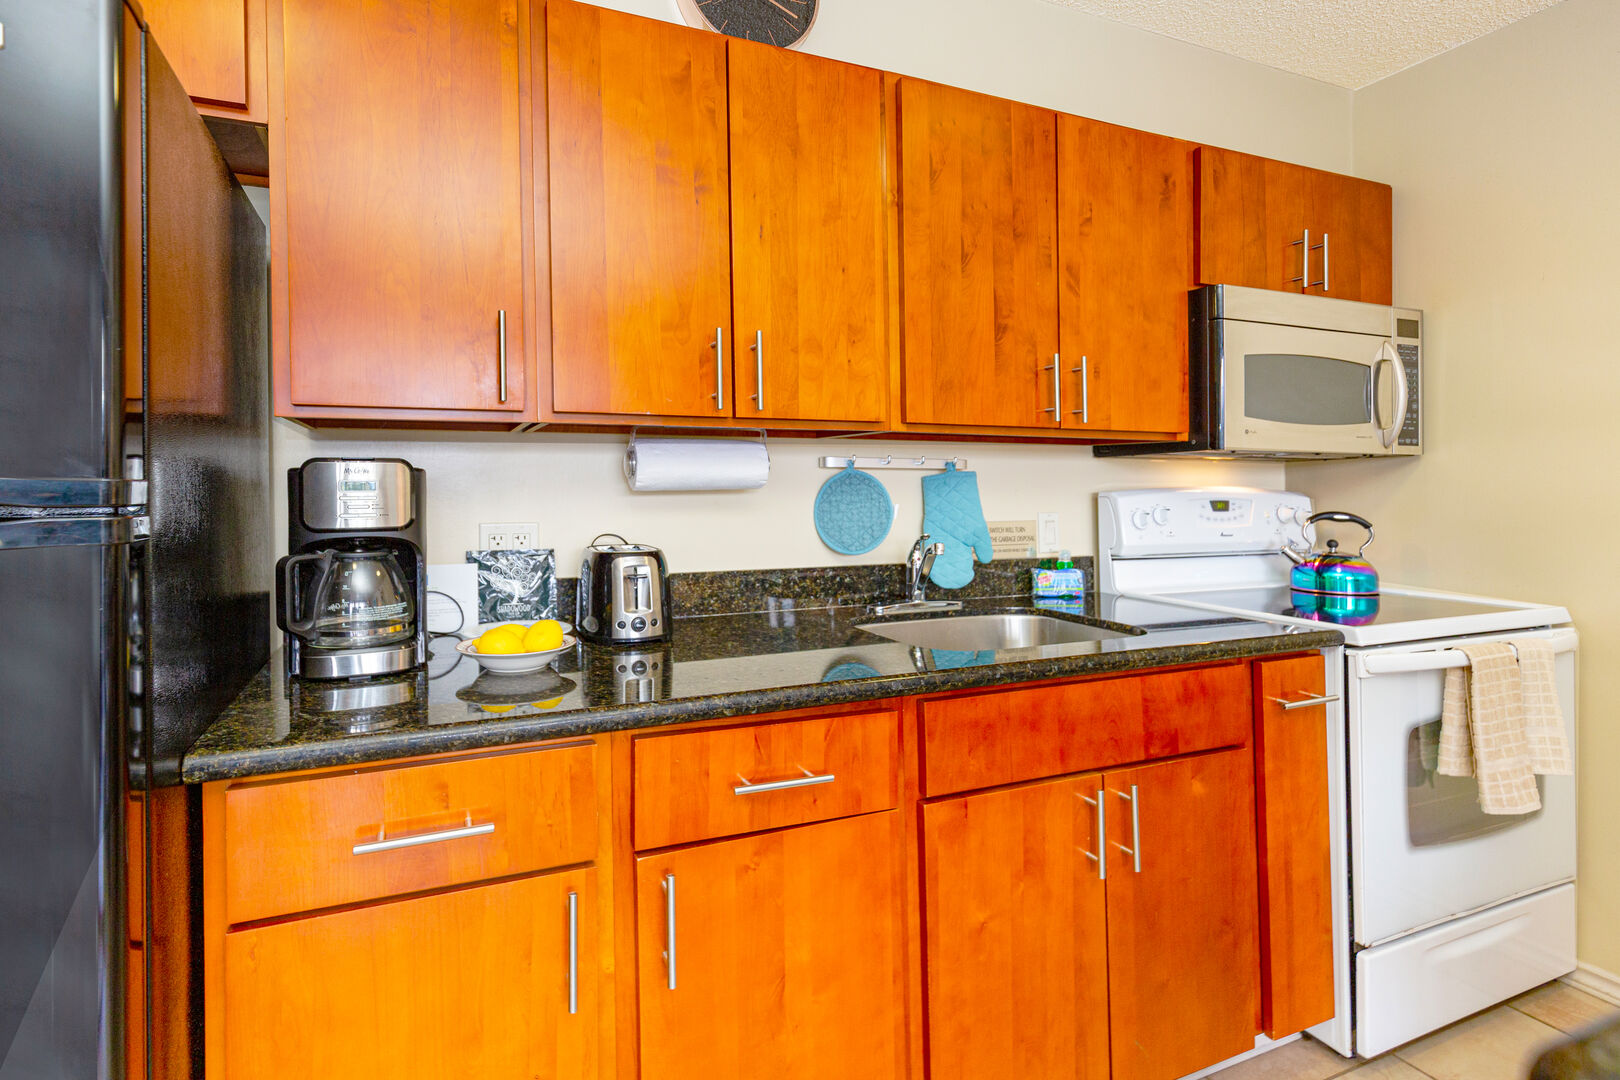 Fully equipped kitchen with full size appliances